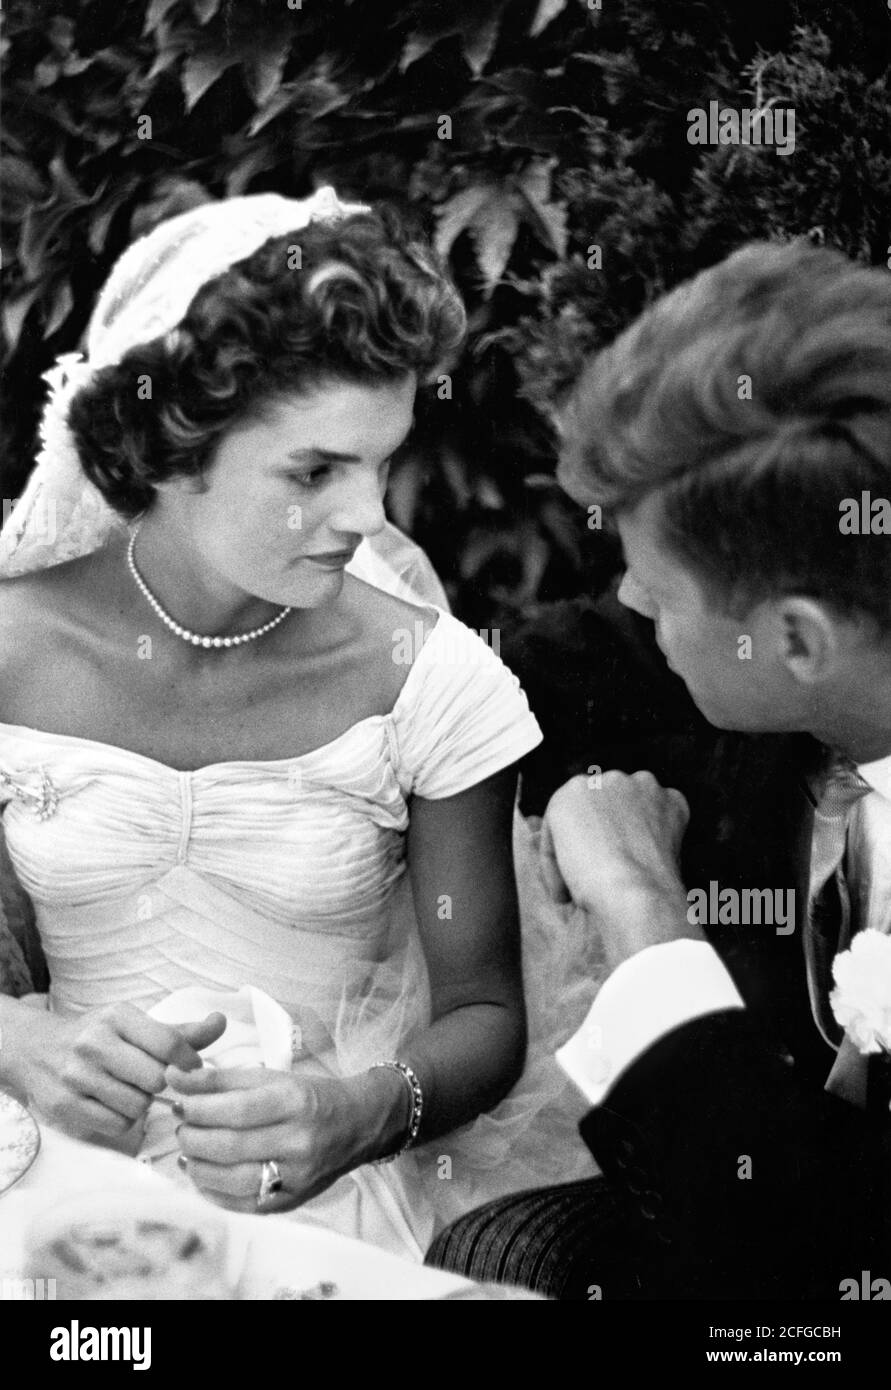 The wedding of Senator John F Kennedy to Jacqueline Bouvier in Newport, RI on September 12, 1953. The couple talking at their wedding reception. Stock Photo